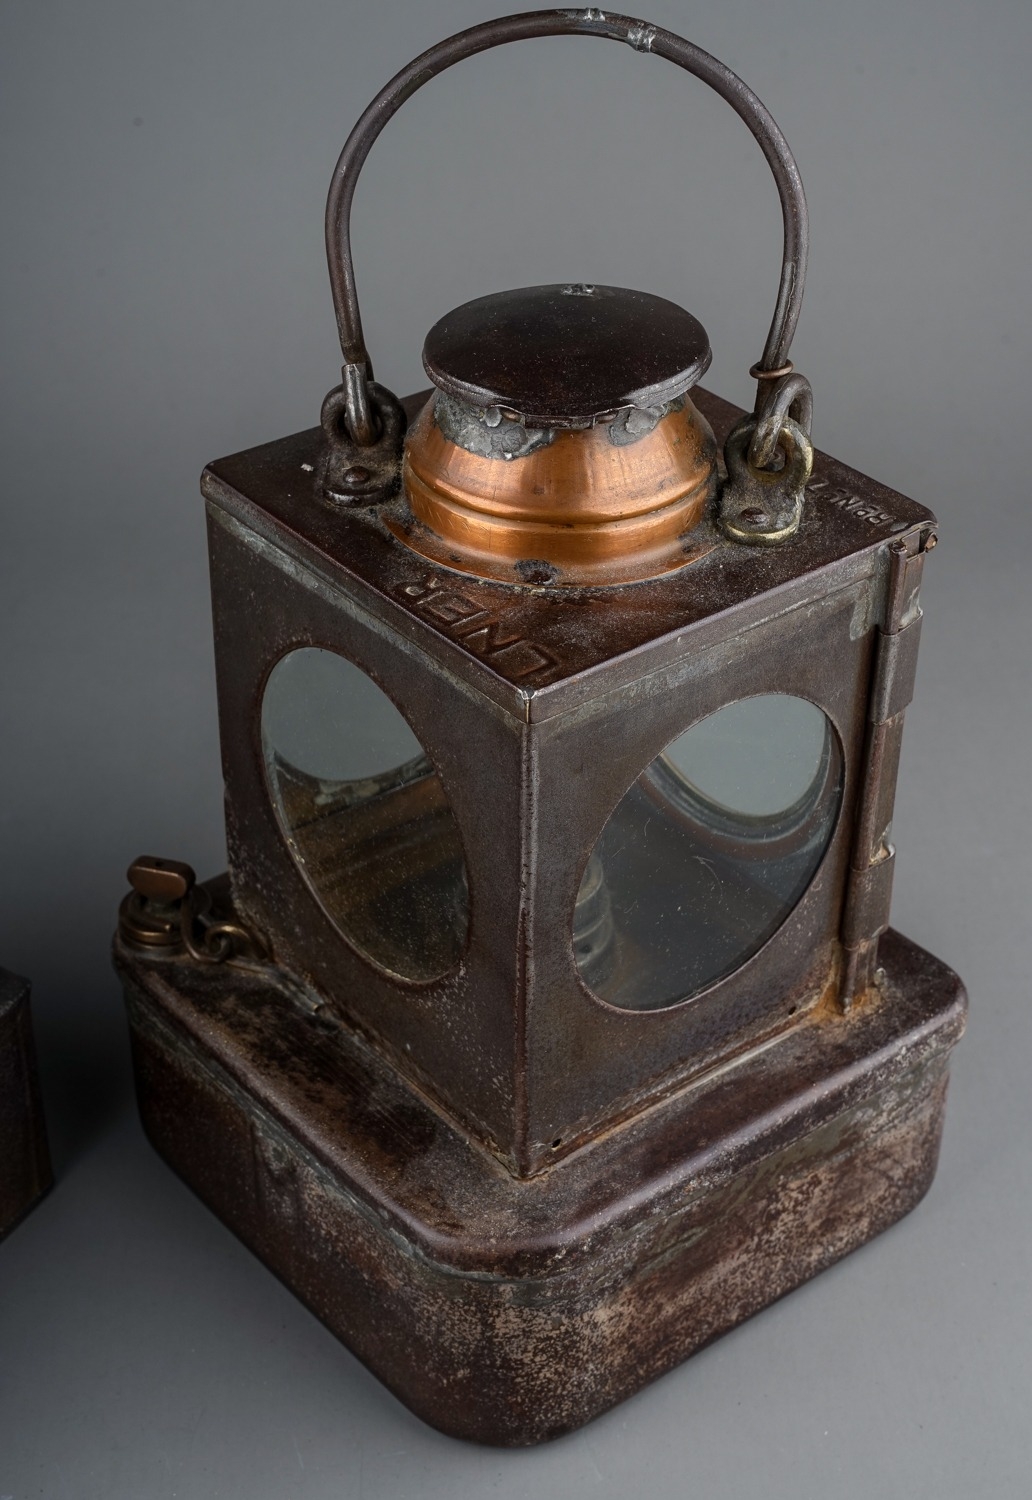 Two British Rail LNER (Eastern) Welch Patent railway lamps, Reg No 711205, approx 23cm high (2) - Image 3 of 4